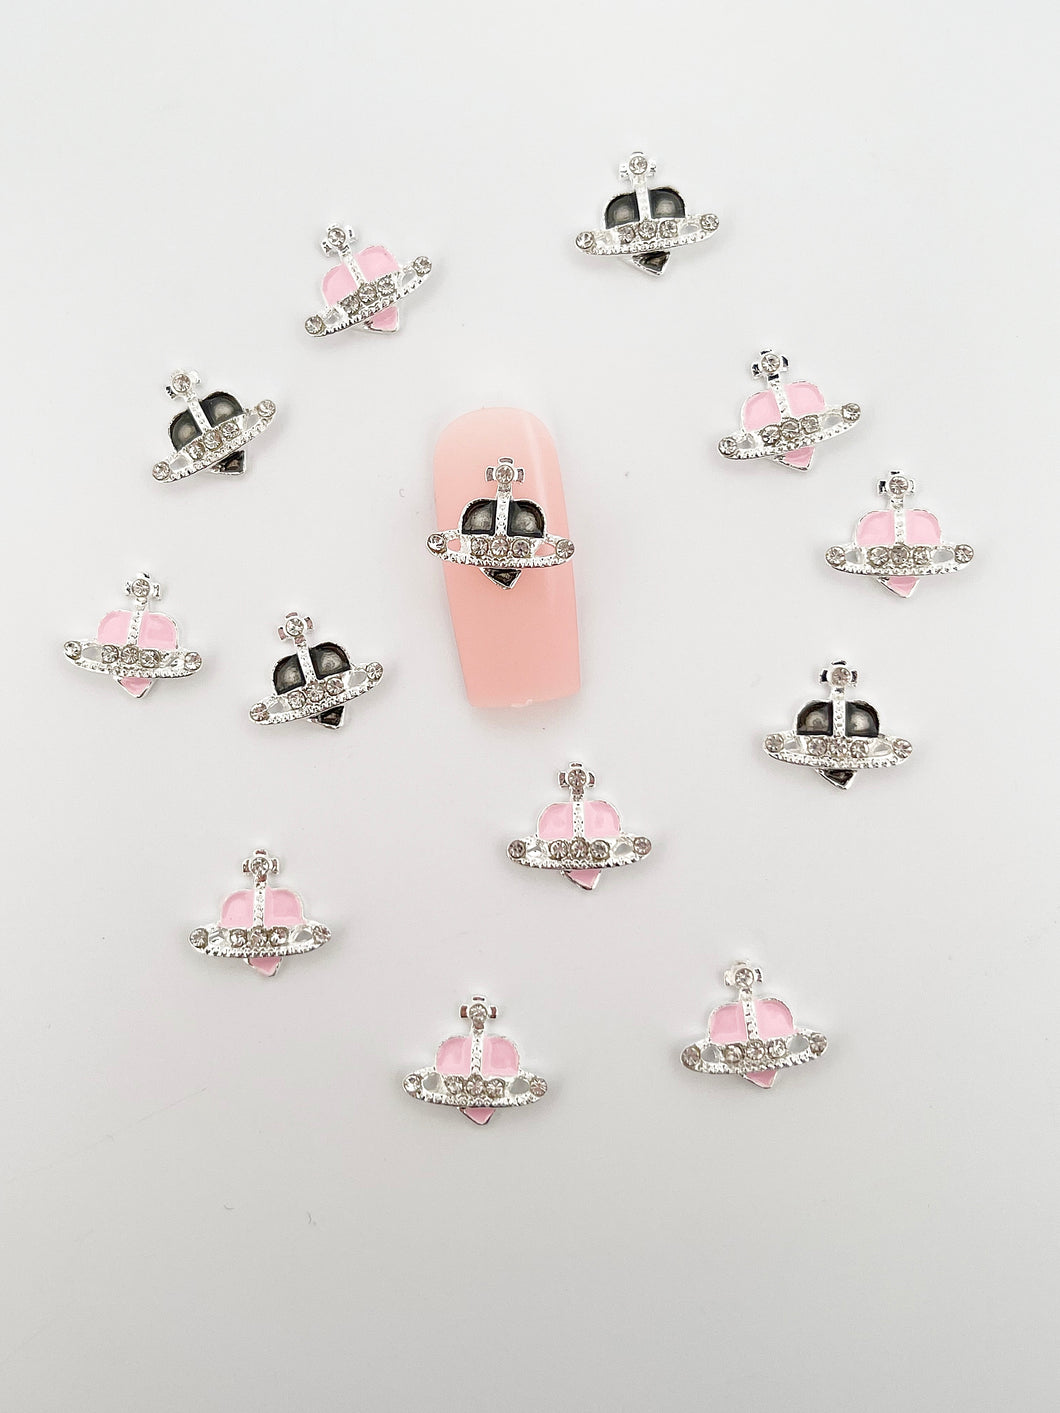 Alloy Nail 3D Charms #12 - 10 Pieces